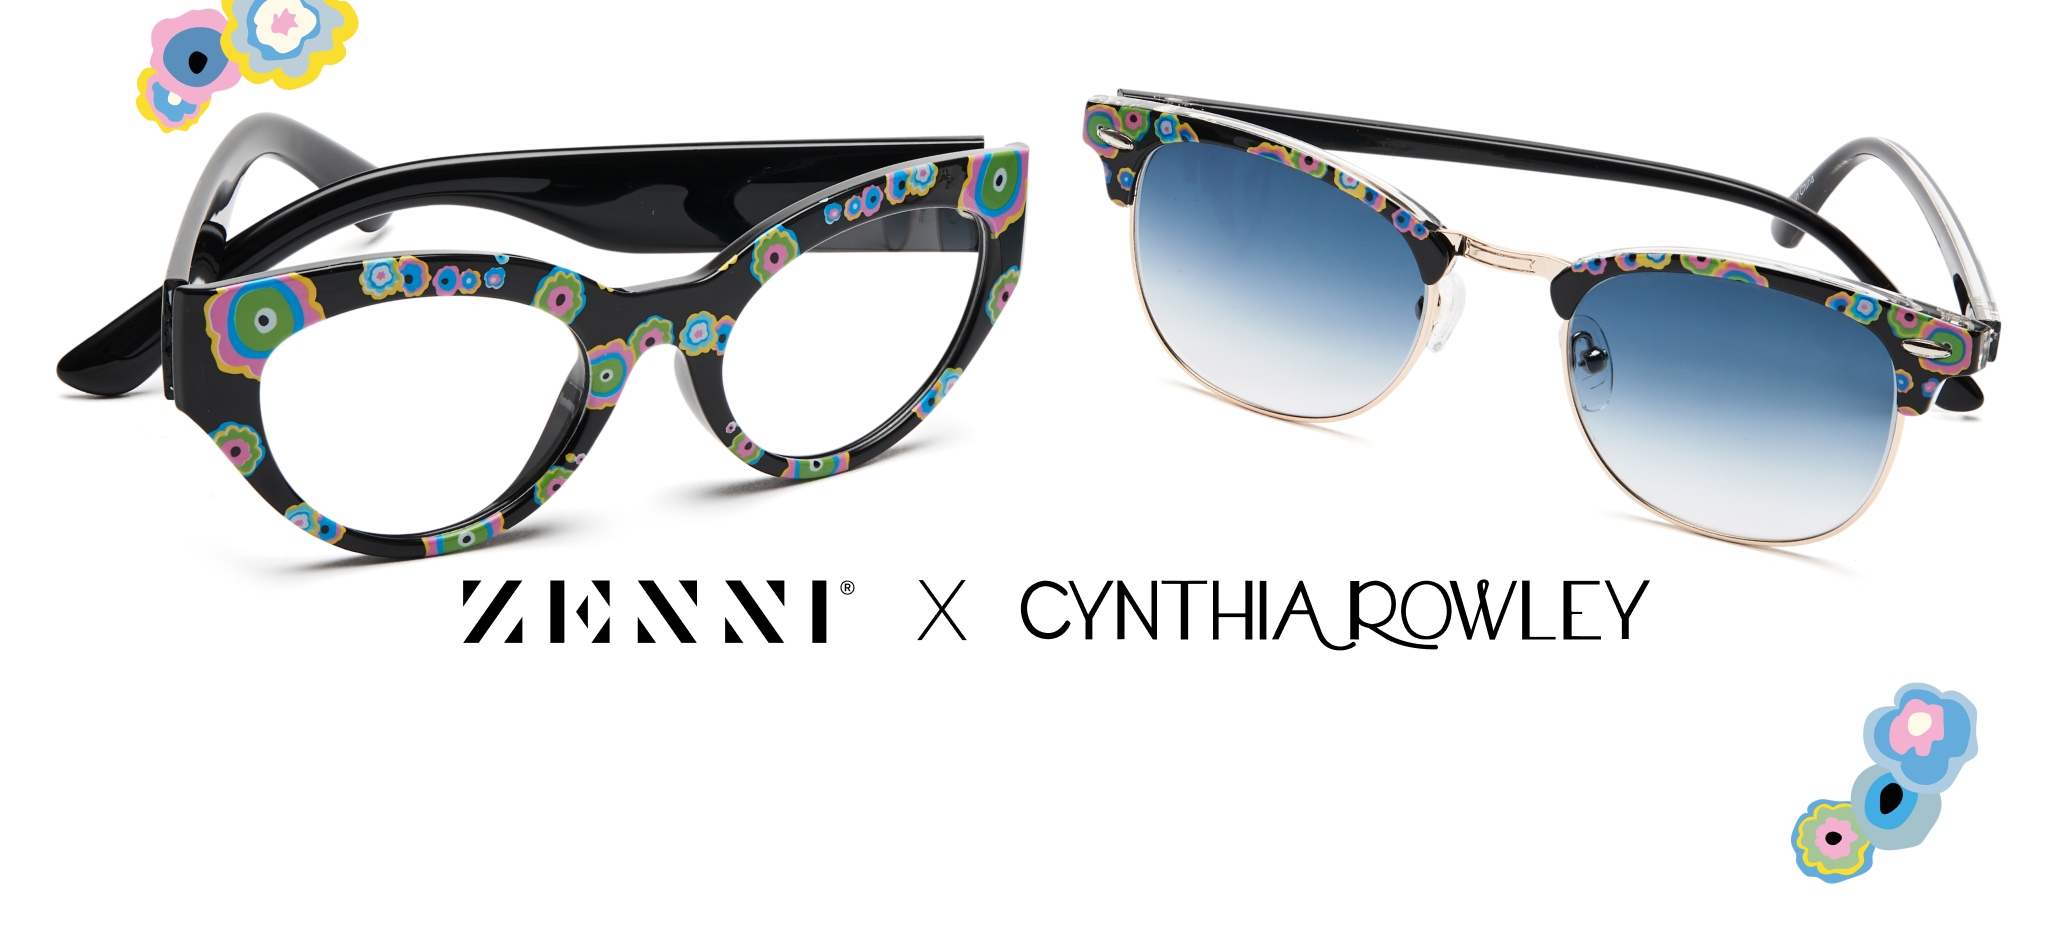 Zenni and Cynthia Rowley. Eyewear collection. We teamed up with fashion icon Cynthia Rowley for a capsule collection of glasses and sunglasses. Image of two pairs of glasses: Zenni Camellia cat-eye glasses #2037039 and Zenni Petal browline glasses #1913329 against a white background, with hand-drawn flower accents.